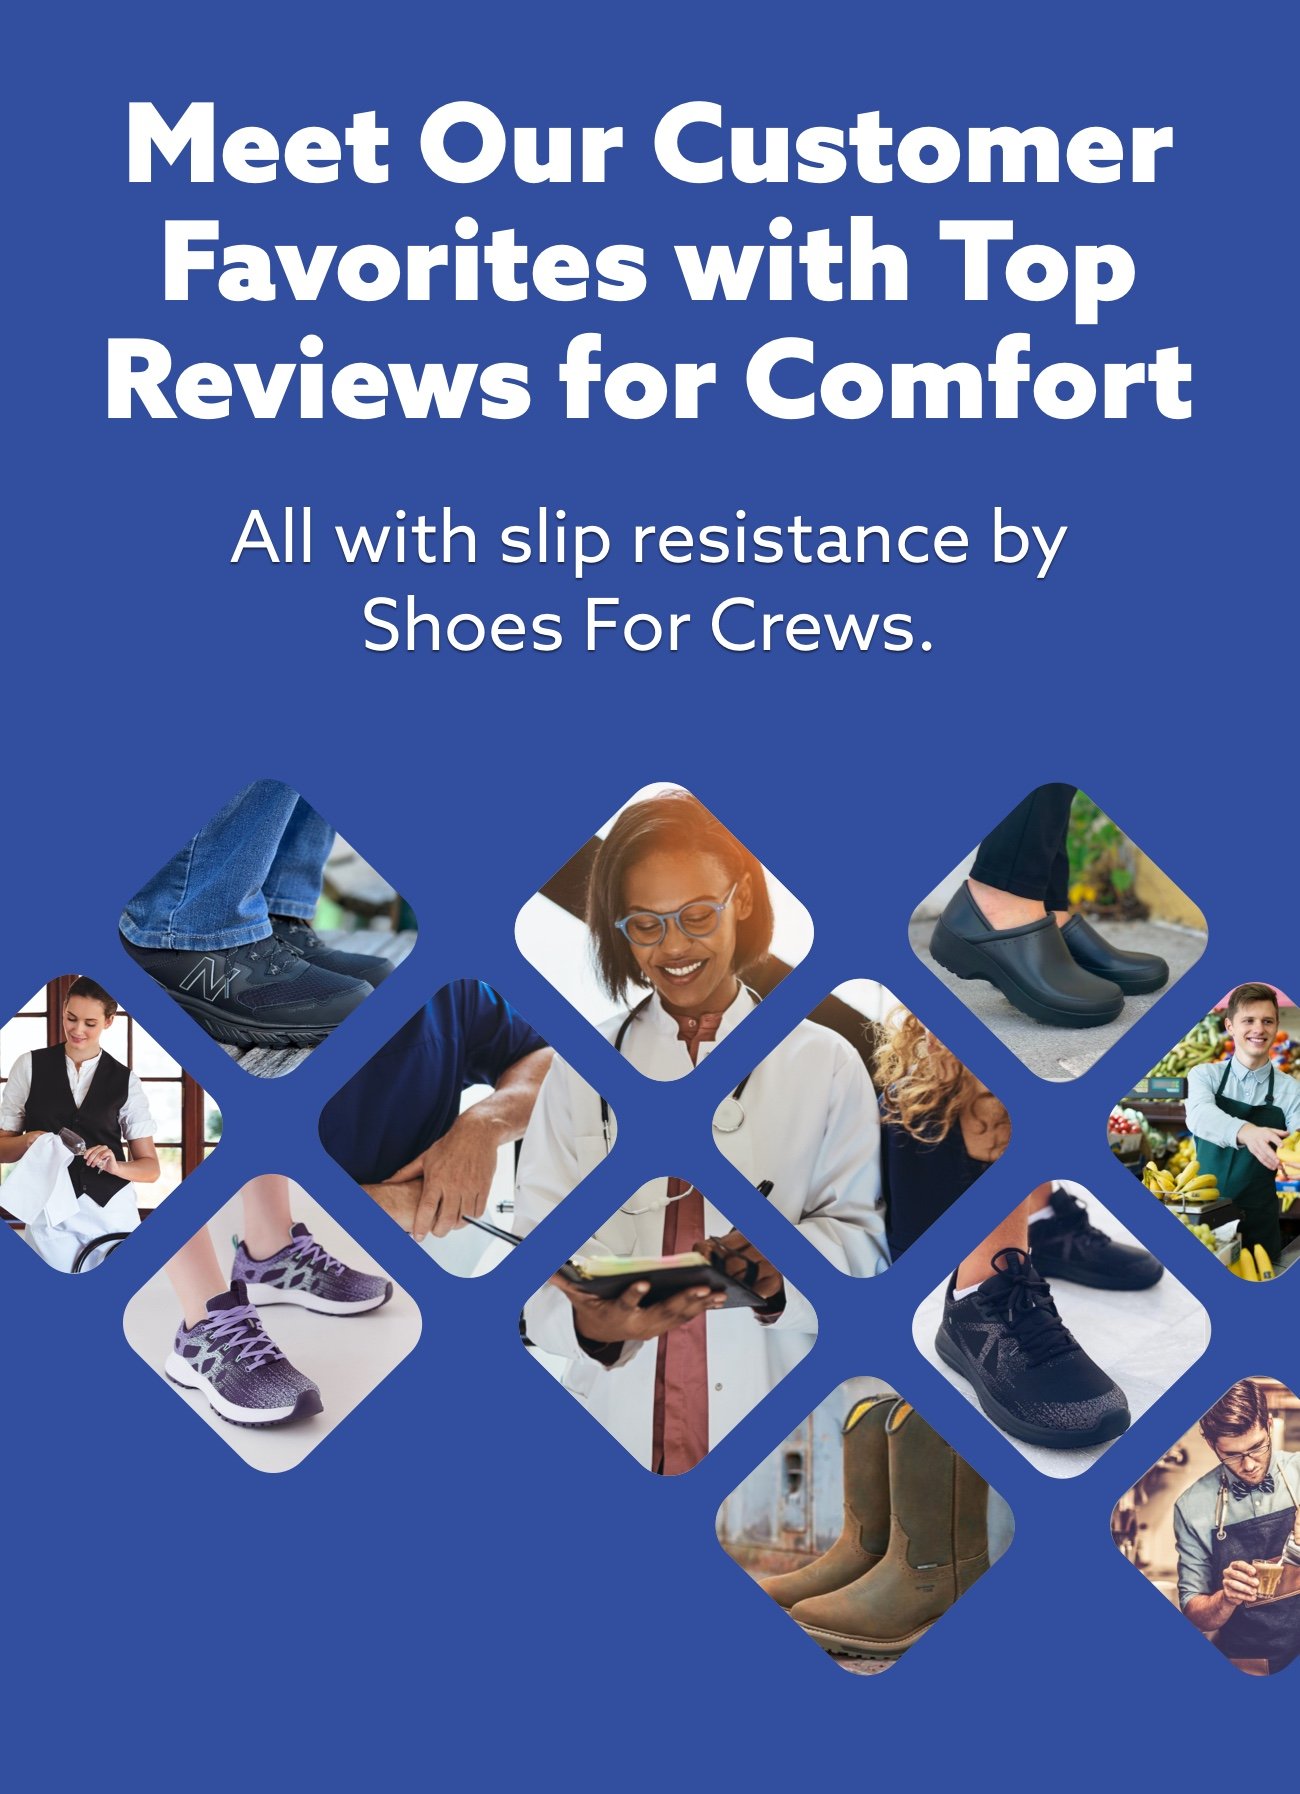 Meet out customer favorites with top reviews for comfort | Shop Now